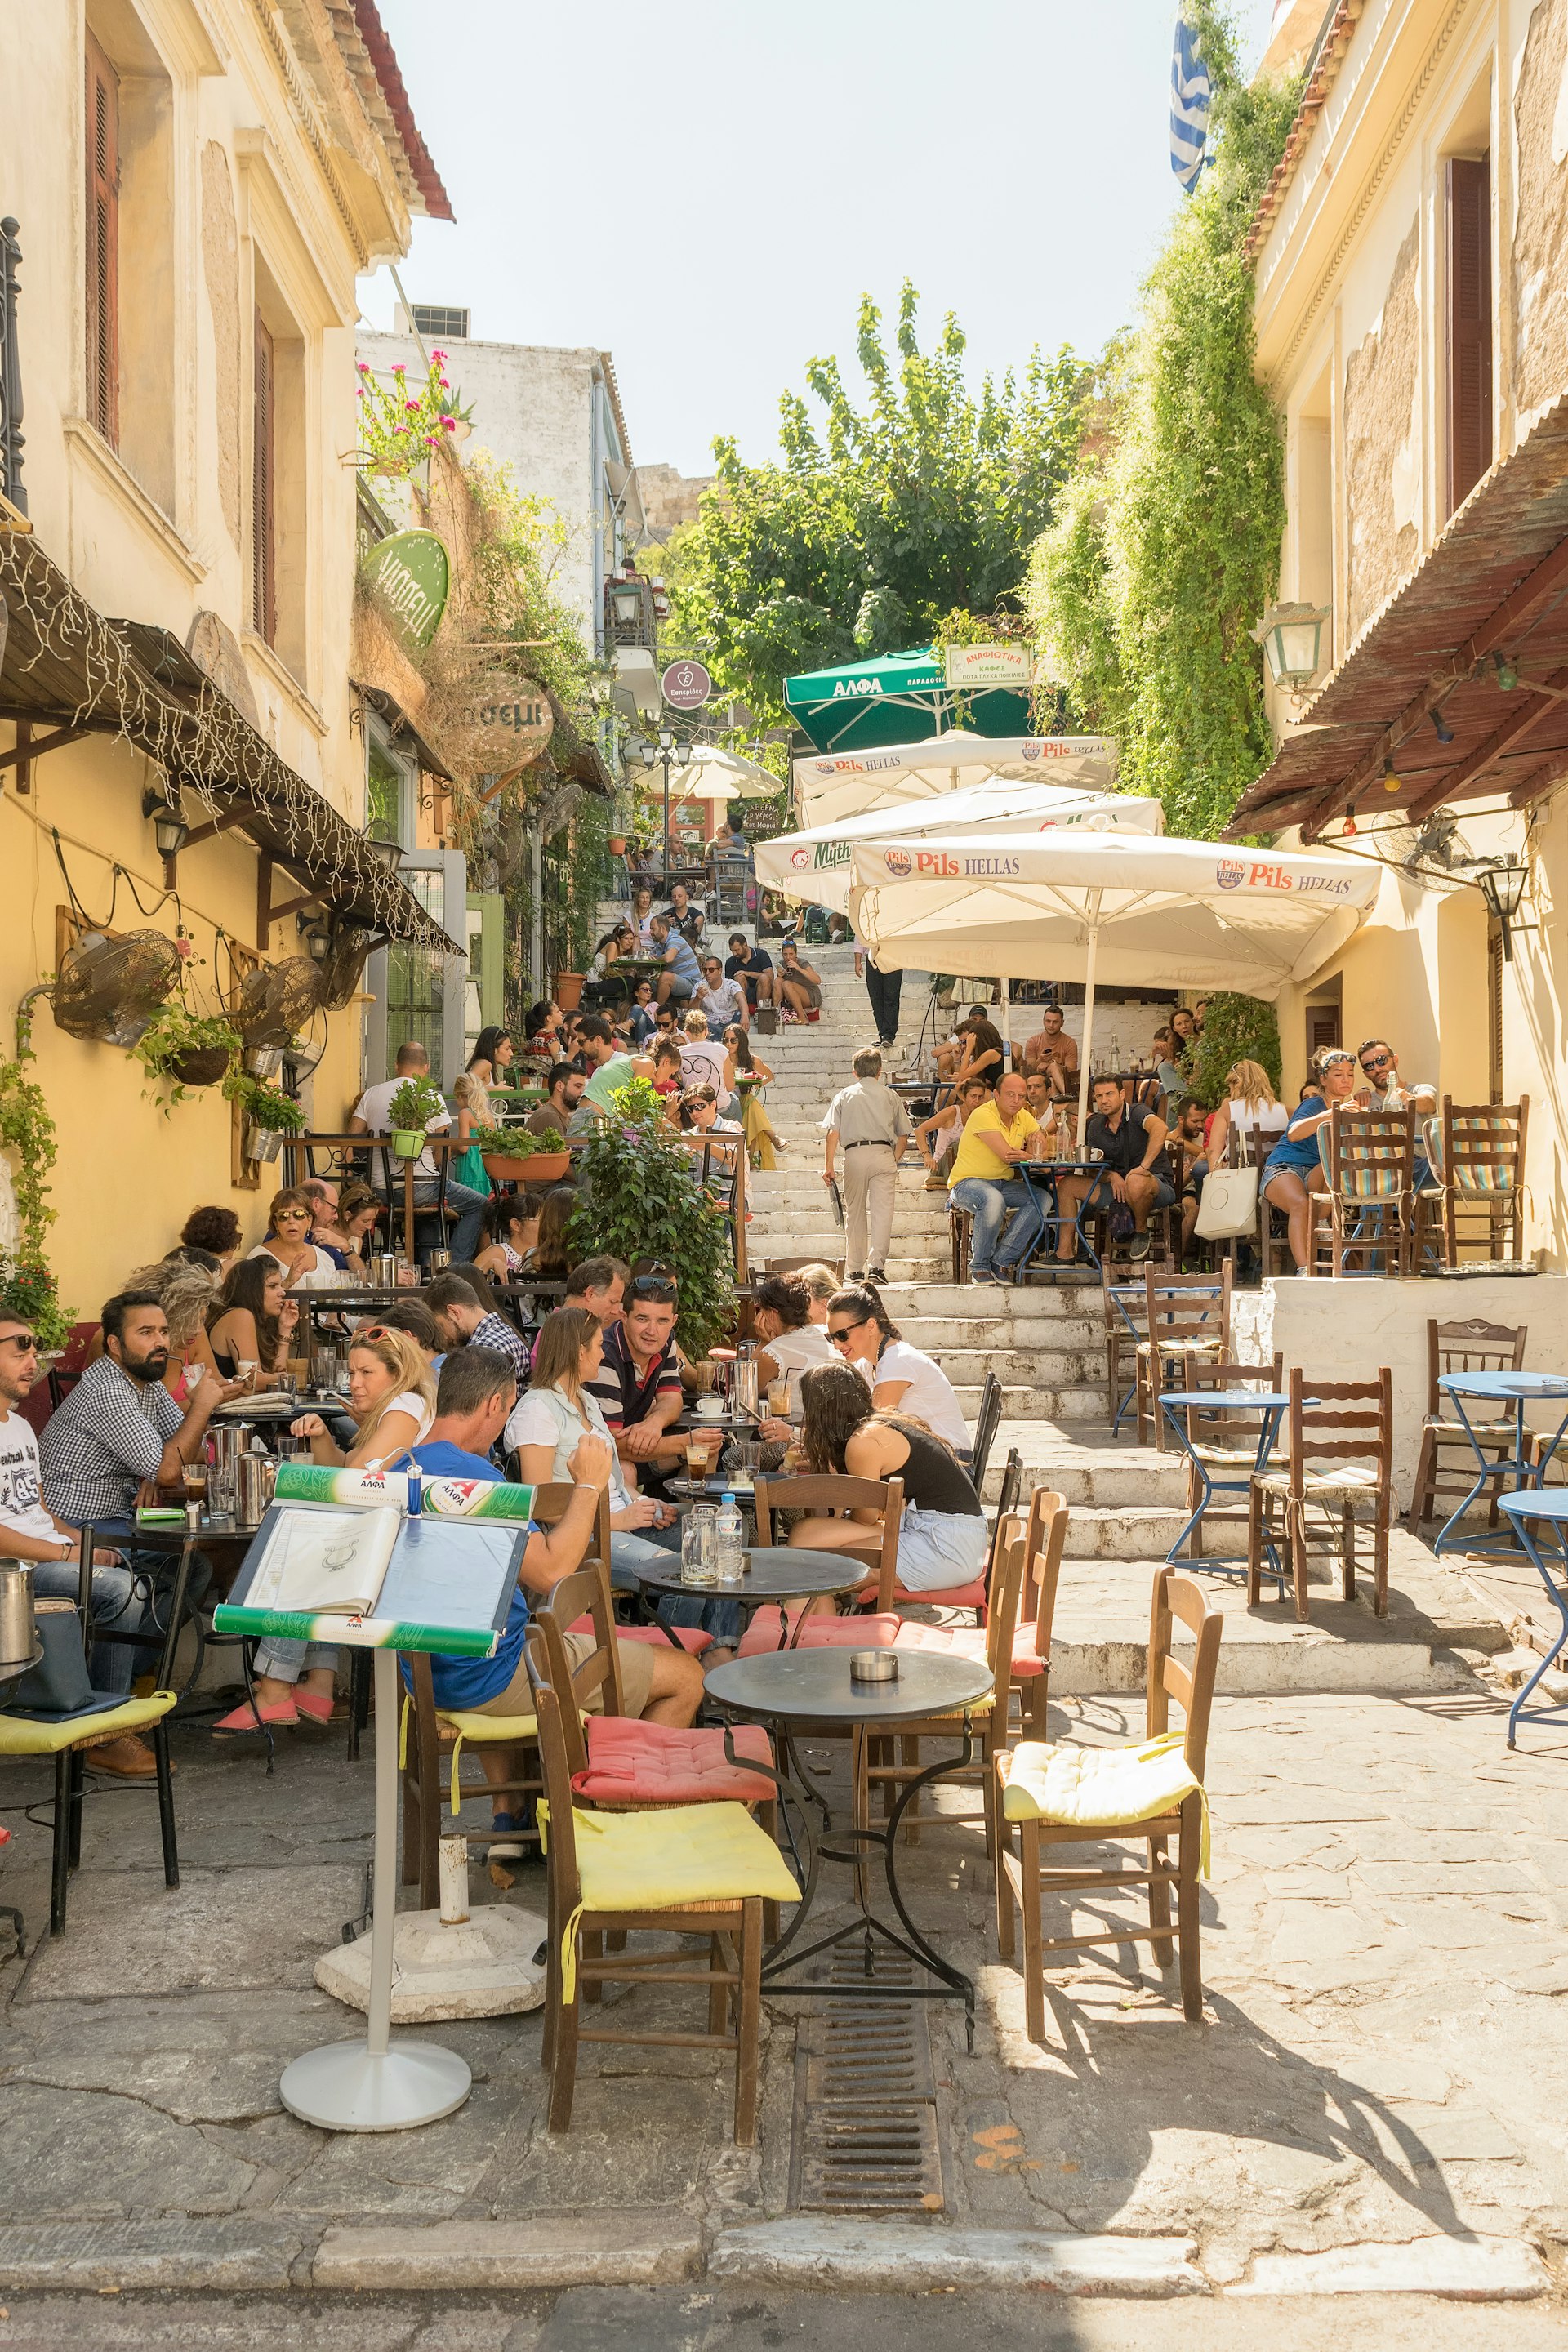 Tourists and local people gathered outside cafes along the cobbled, hilly Plaka street in Athens, Greece